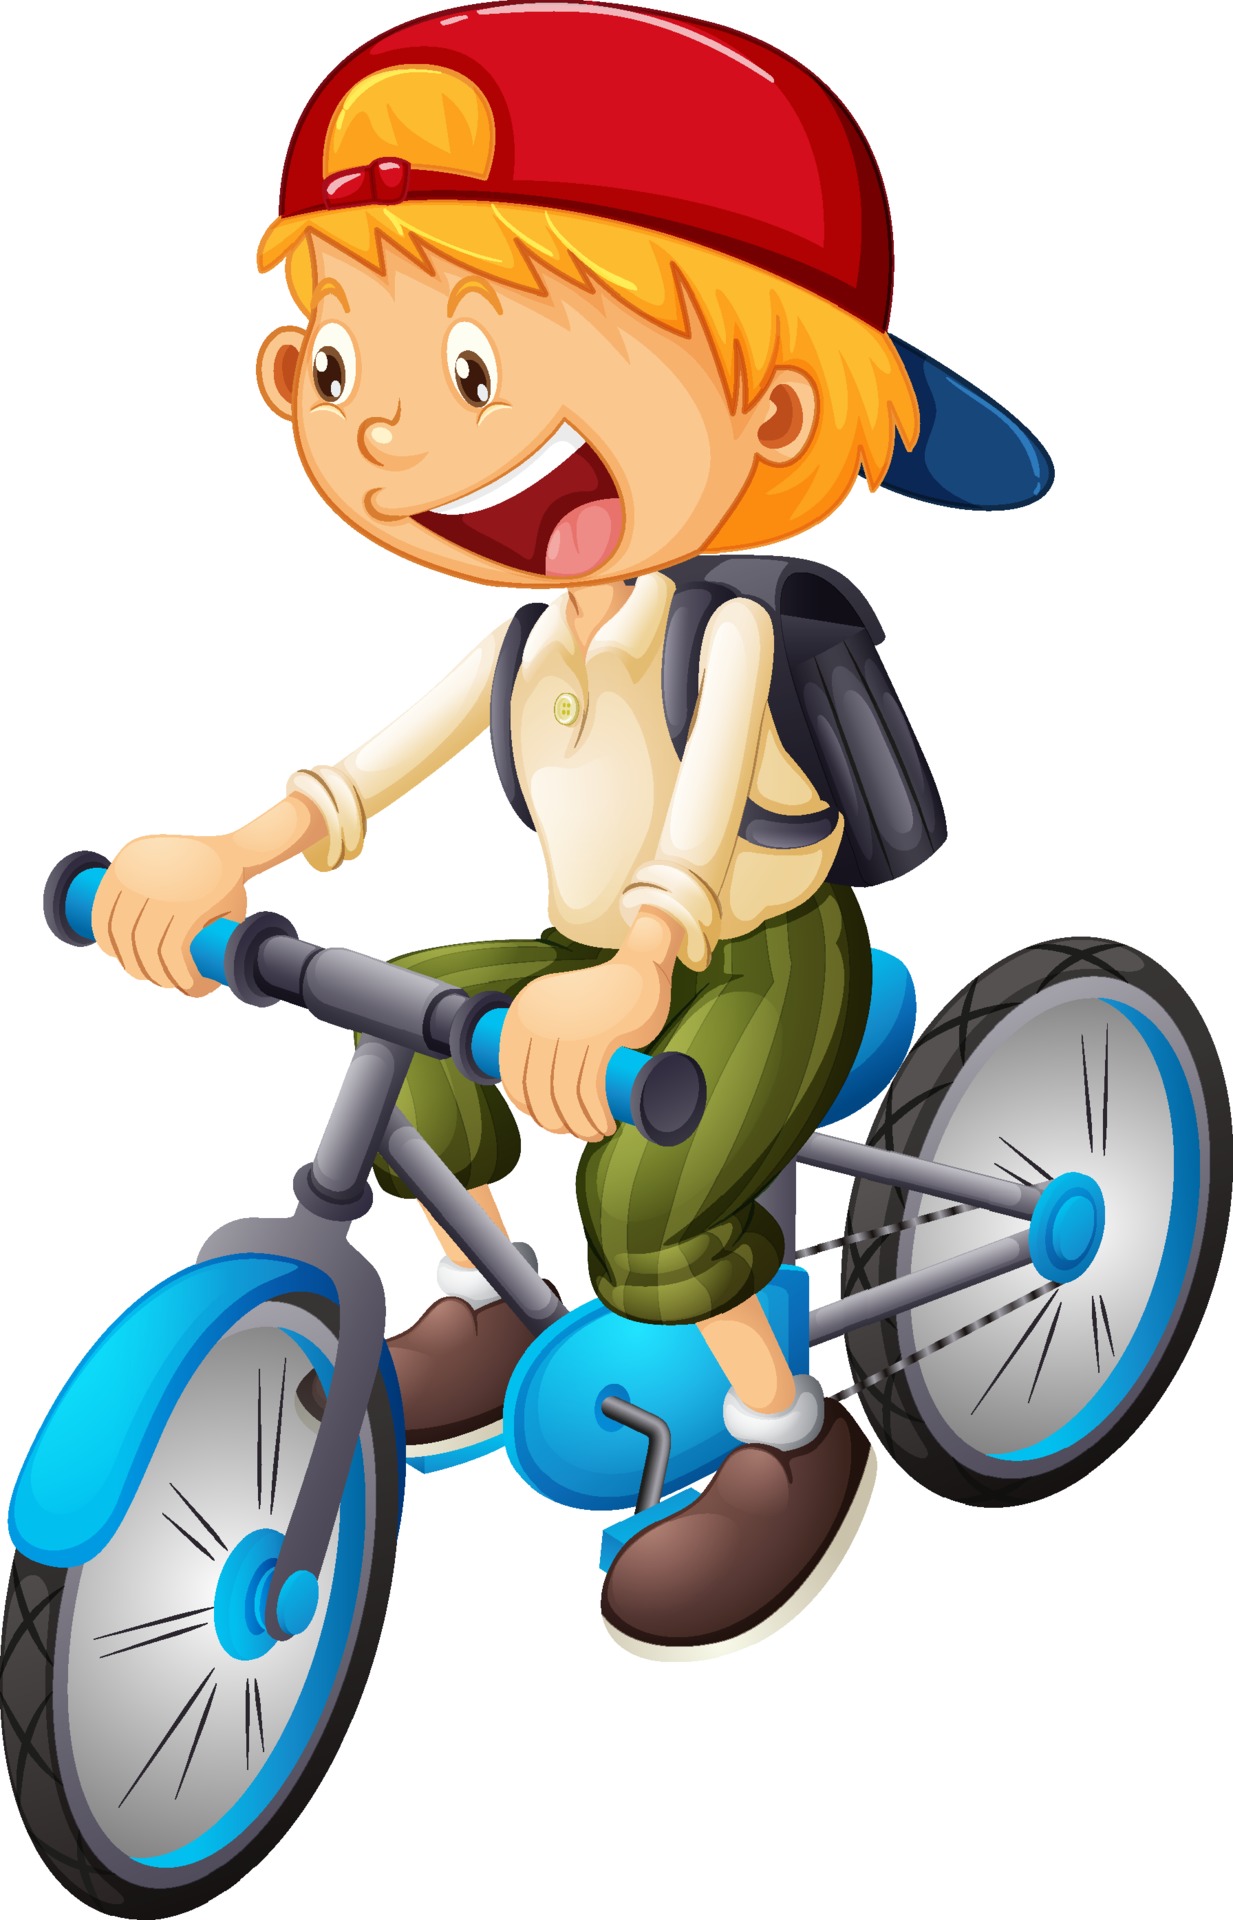 A Boy Riding A Bicycle Cartoon Character Isolated On White Background